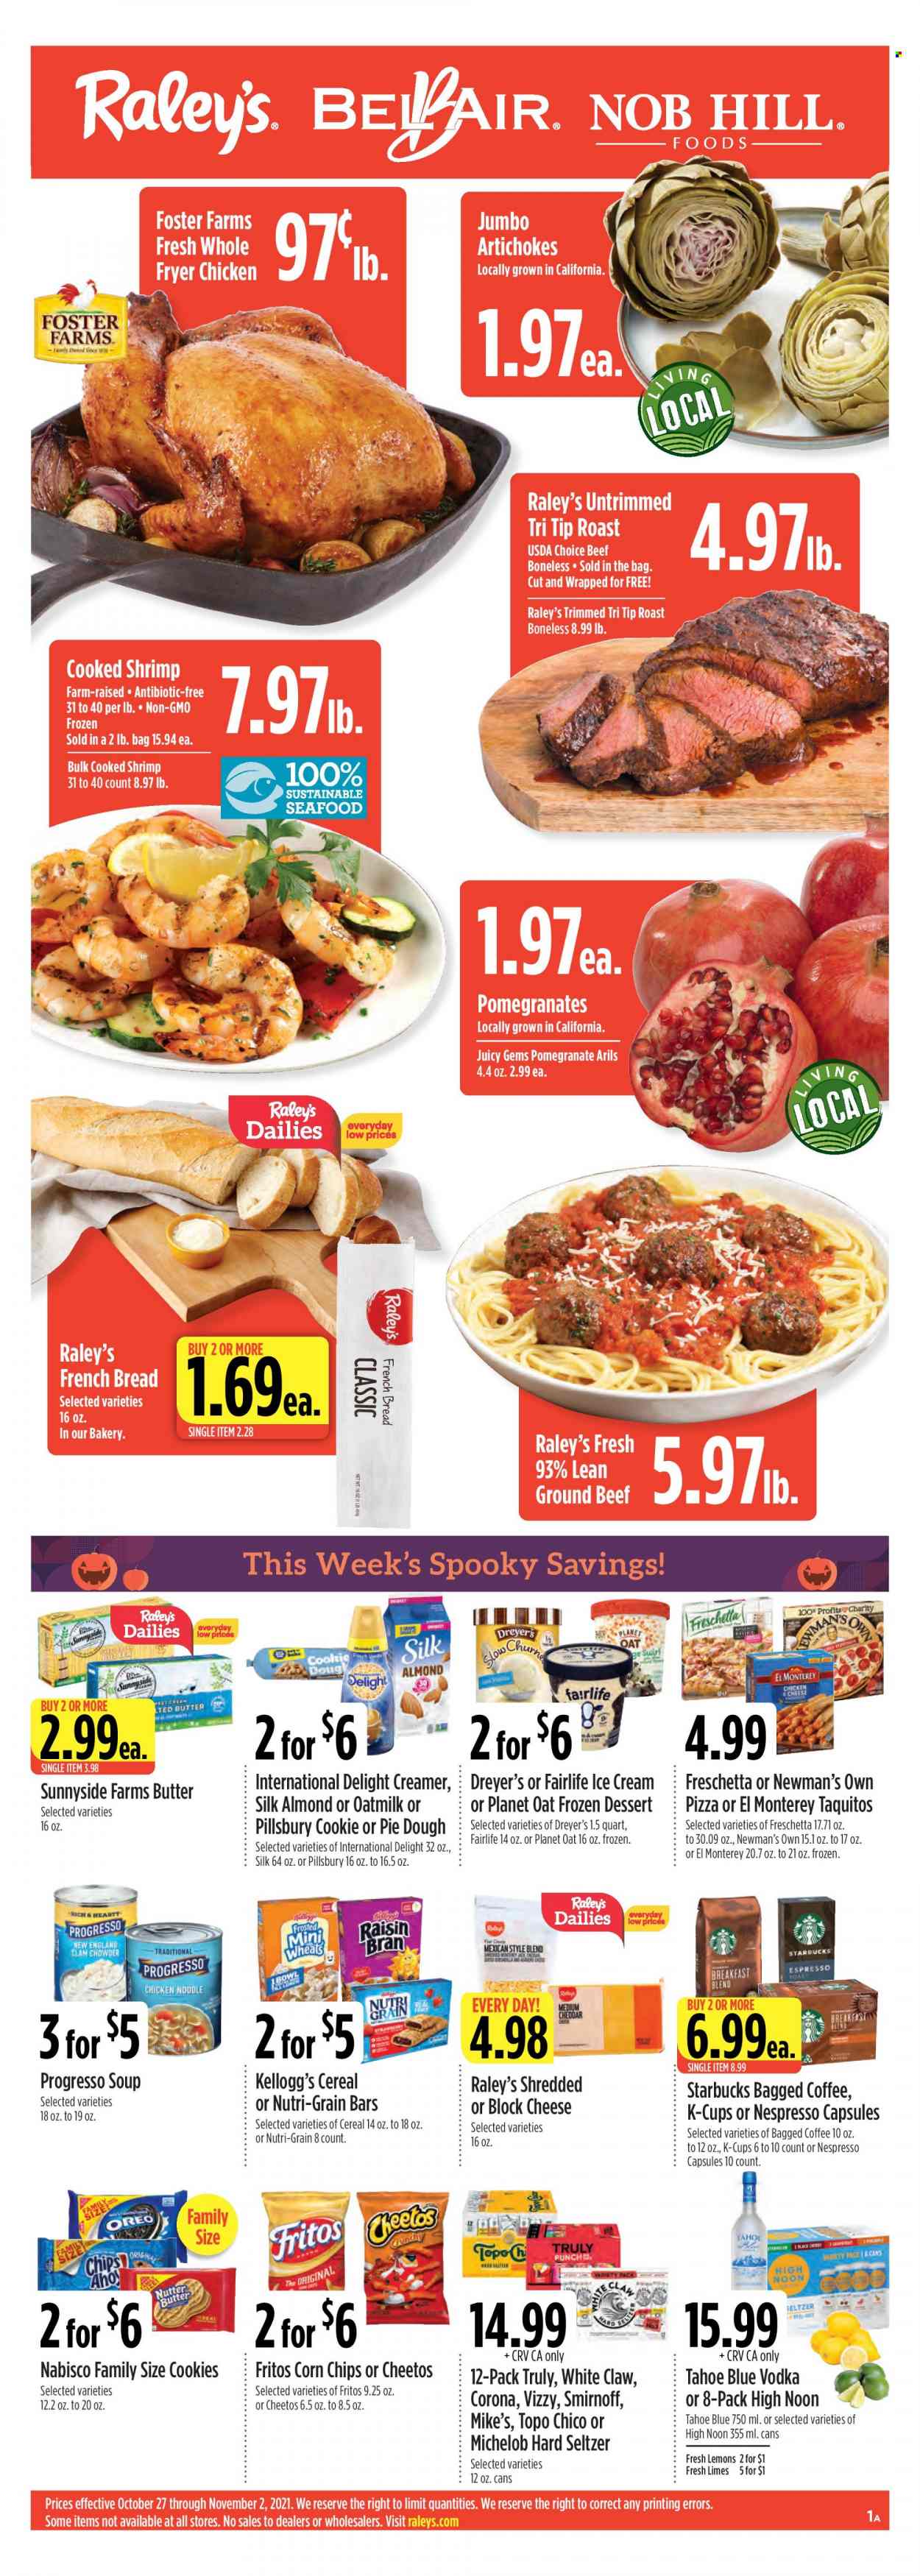 thumbnail - Raley's Flyer - 10/27/2021 - 11/02/2021 - Sales products - bread, pie, Ace, french bread, artichoke, limes, shrimps, pizza, Pillsbury, noodles, Progresso, taquitos, Oreo, oat milk, butter, creamer, ice cream, cookies, Kellogg's, Nutri-Grain bars, Fritos, Cheetos, corn chips, oats, clam chowder, cereals, Raisin Bran, Nutri-Grain, Starbucks, Nespresso, coffee capsules, K-Cups, bagged coffee, breakfast blend, Smirnoff, vodka, White Claw, Hard Seltzer, TRULY, beer, Corona Extra, beef meat, ground beef, Cream Silk, Michelob, pomegranate, lemons. Page 1.